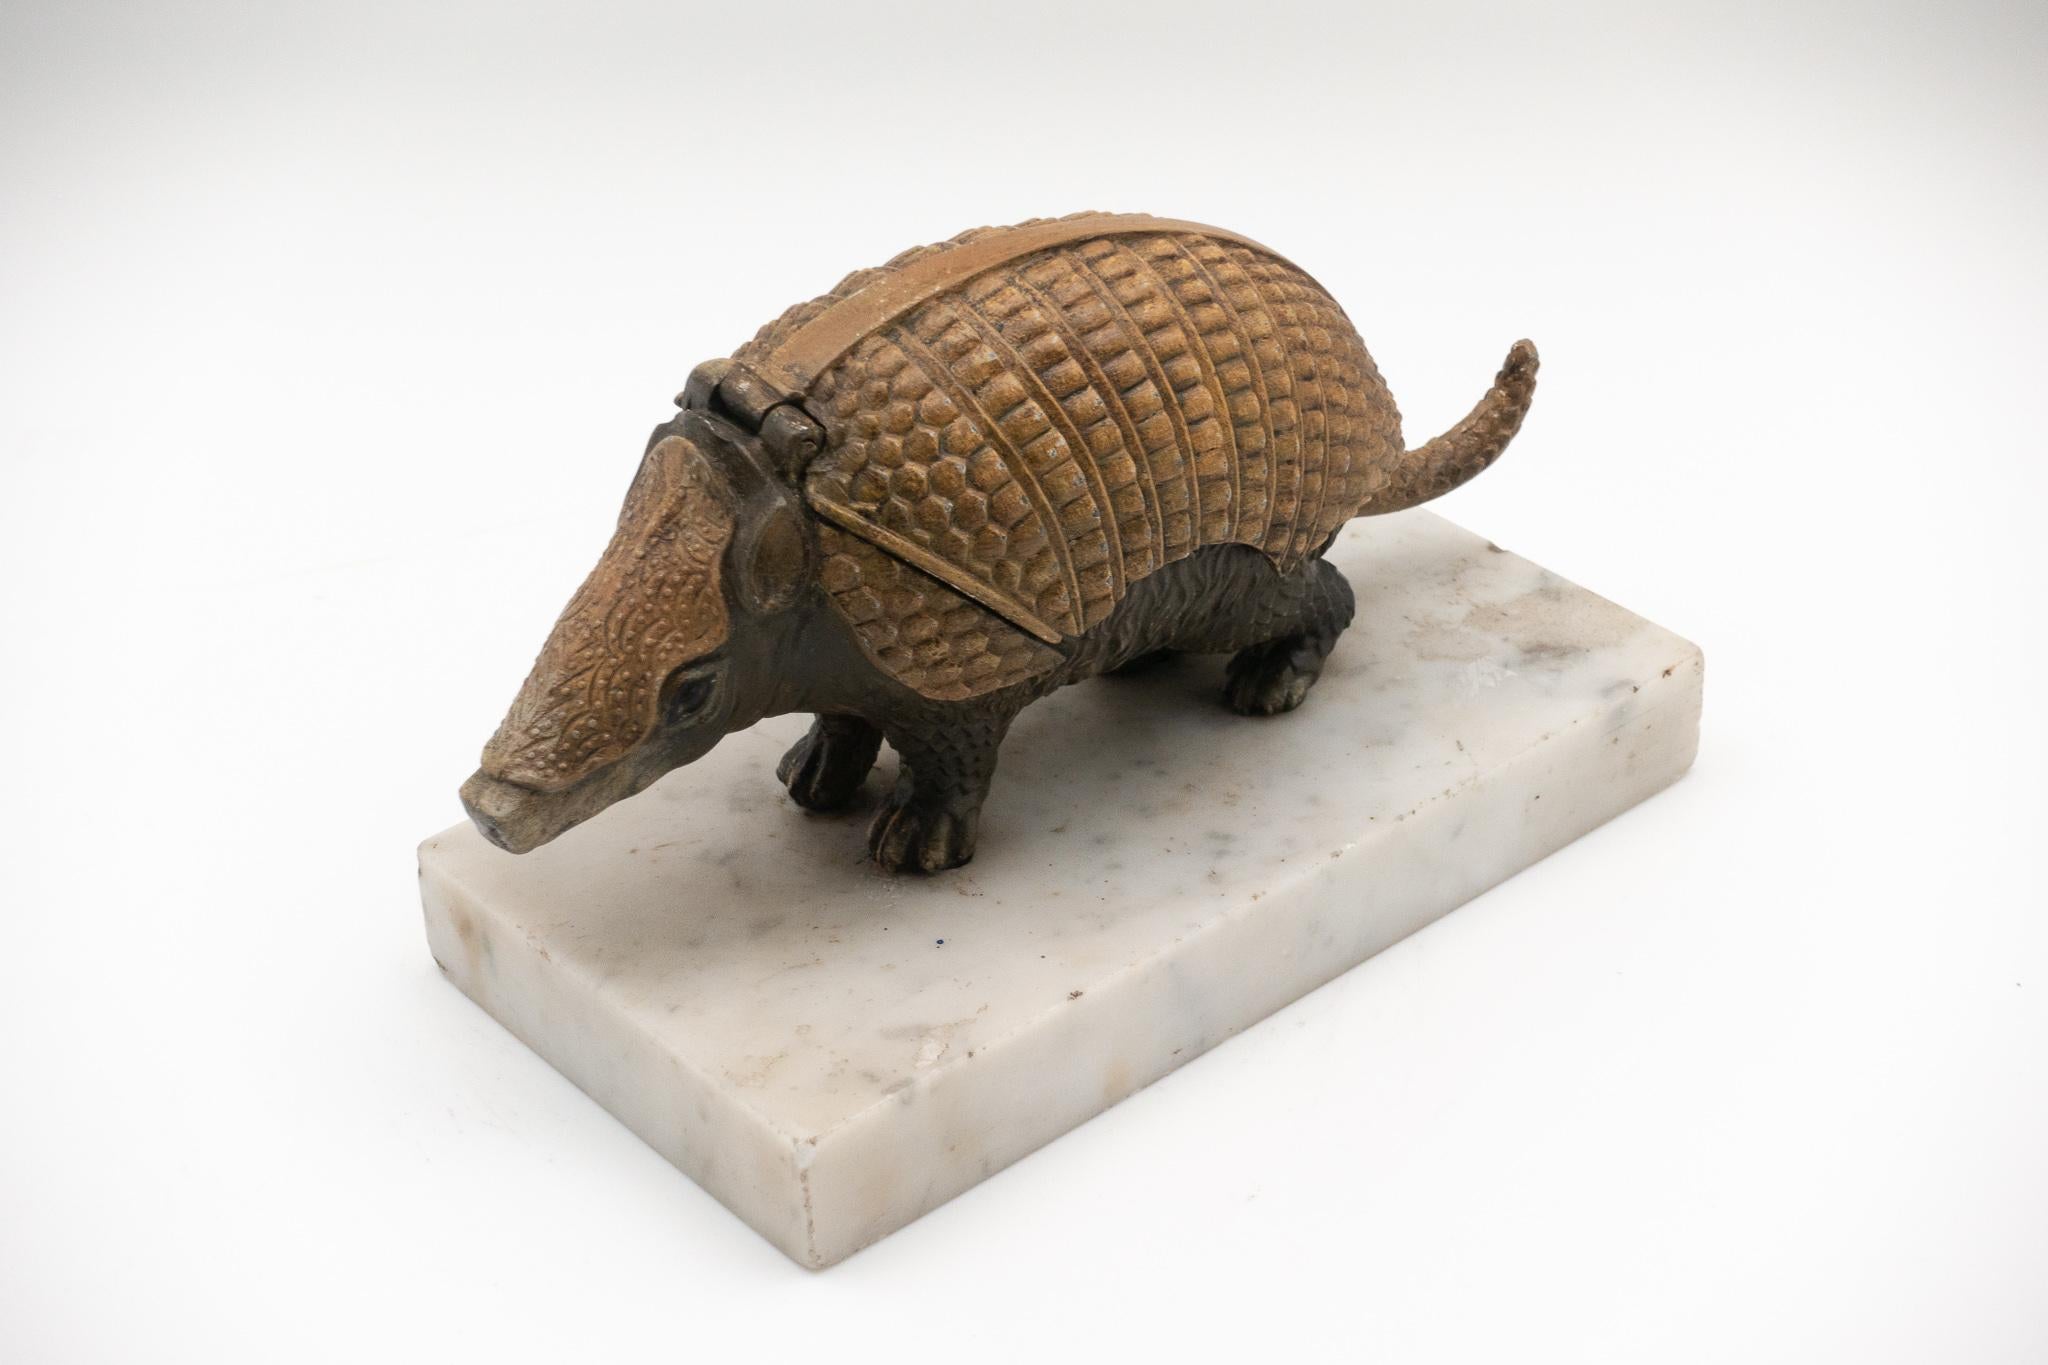 Unusual 19th century bronze armadillo inkwell on a marble base. Armored back opens to reveal inkwell.